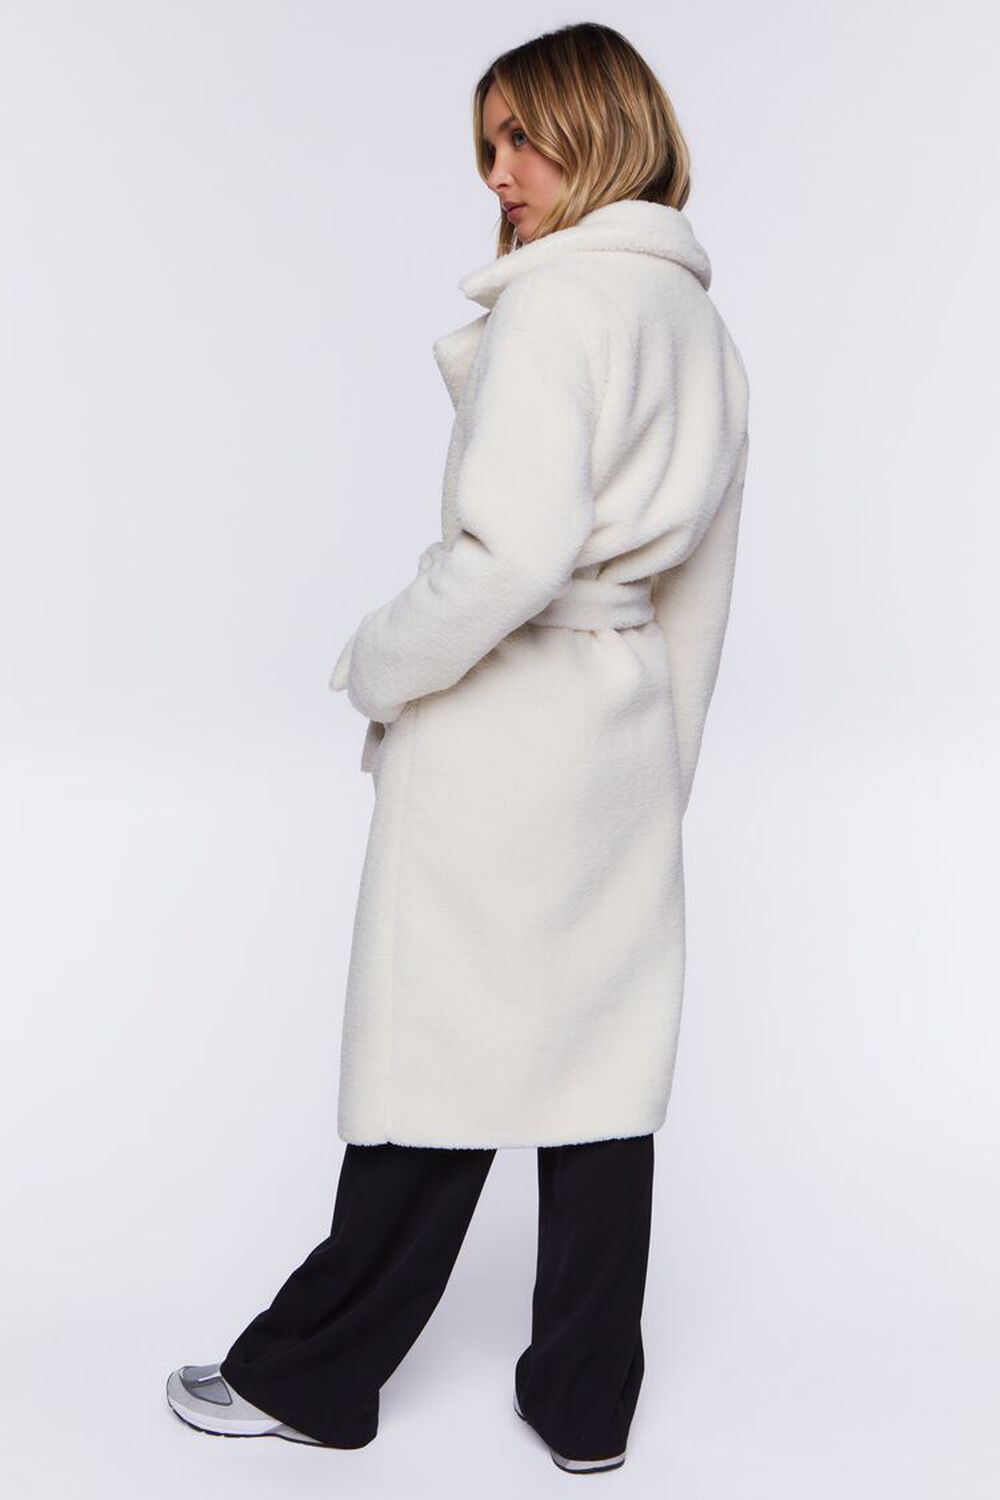 CREAM Faux Shearling Belted Coat, image 3